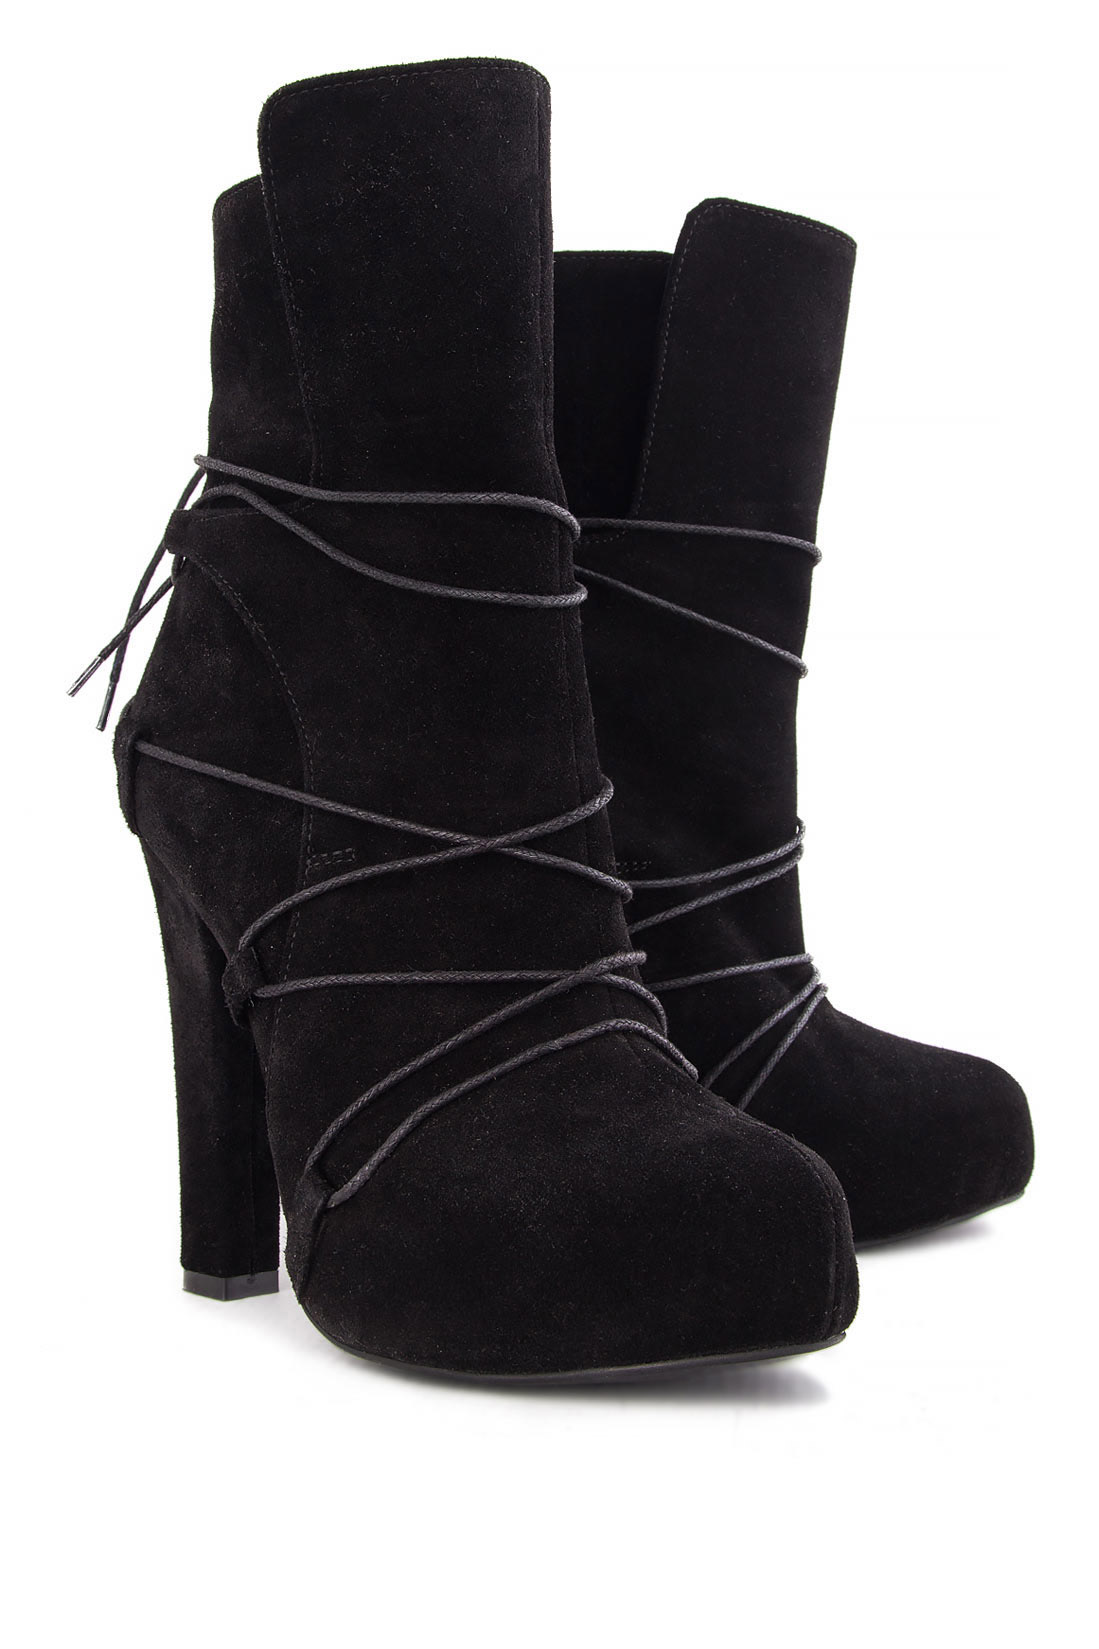 Suede ankle boots Ana Kaloni image 1